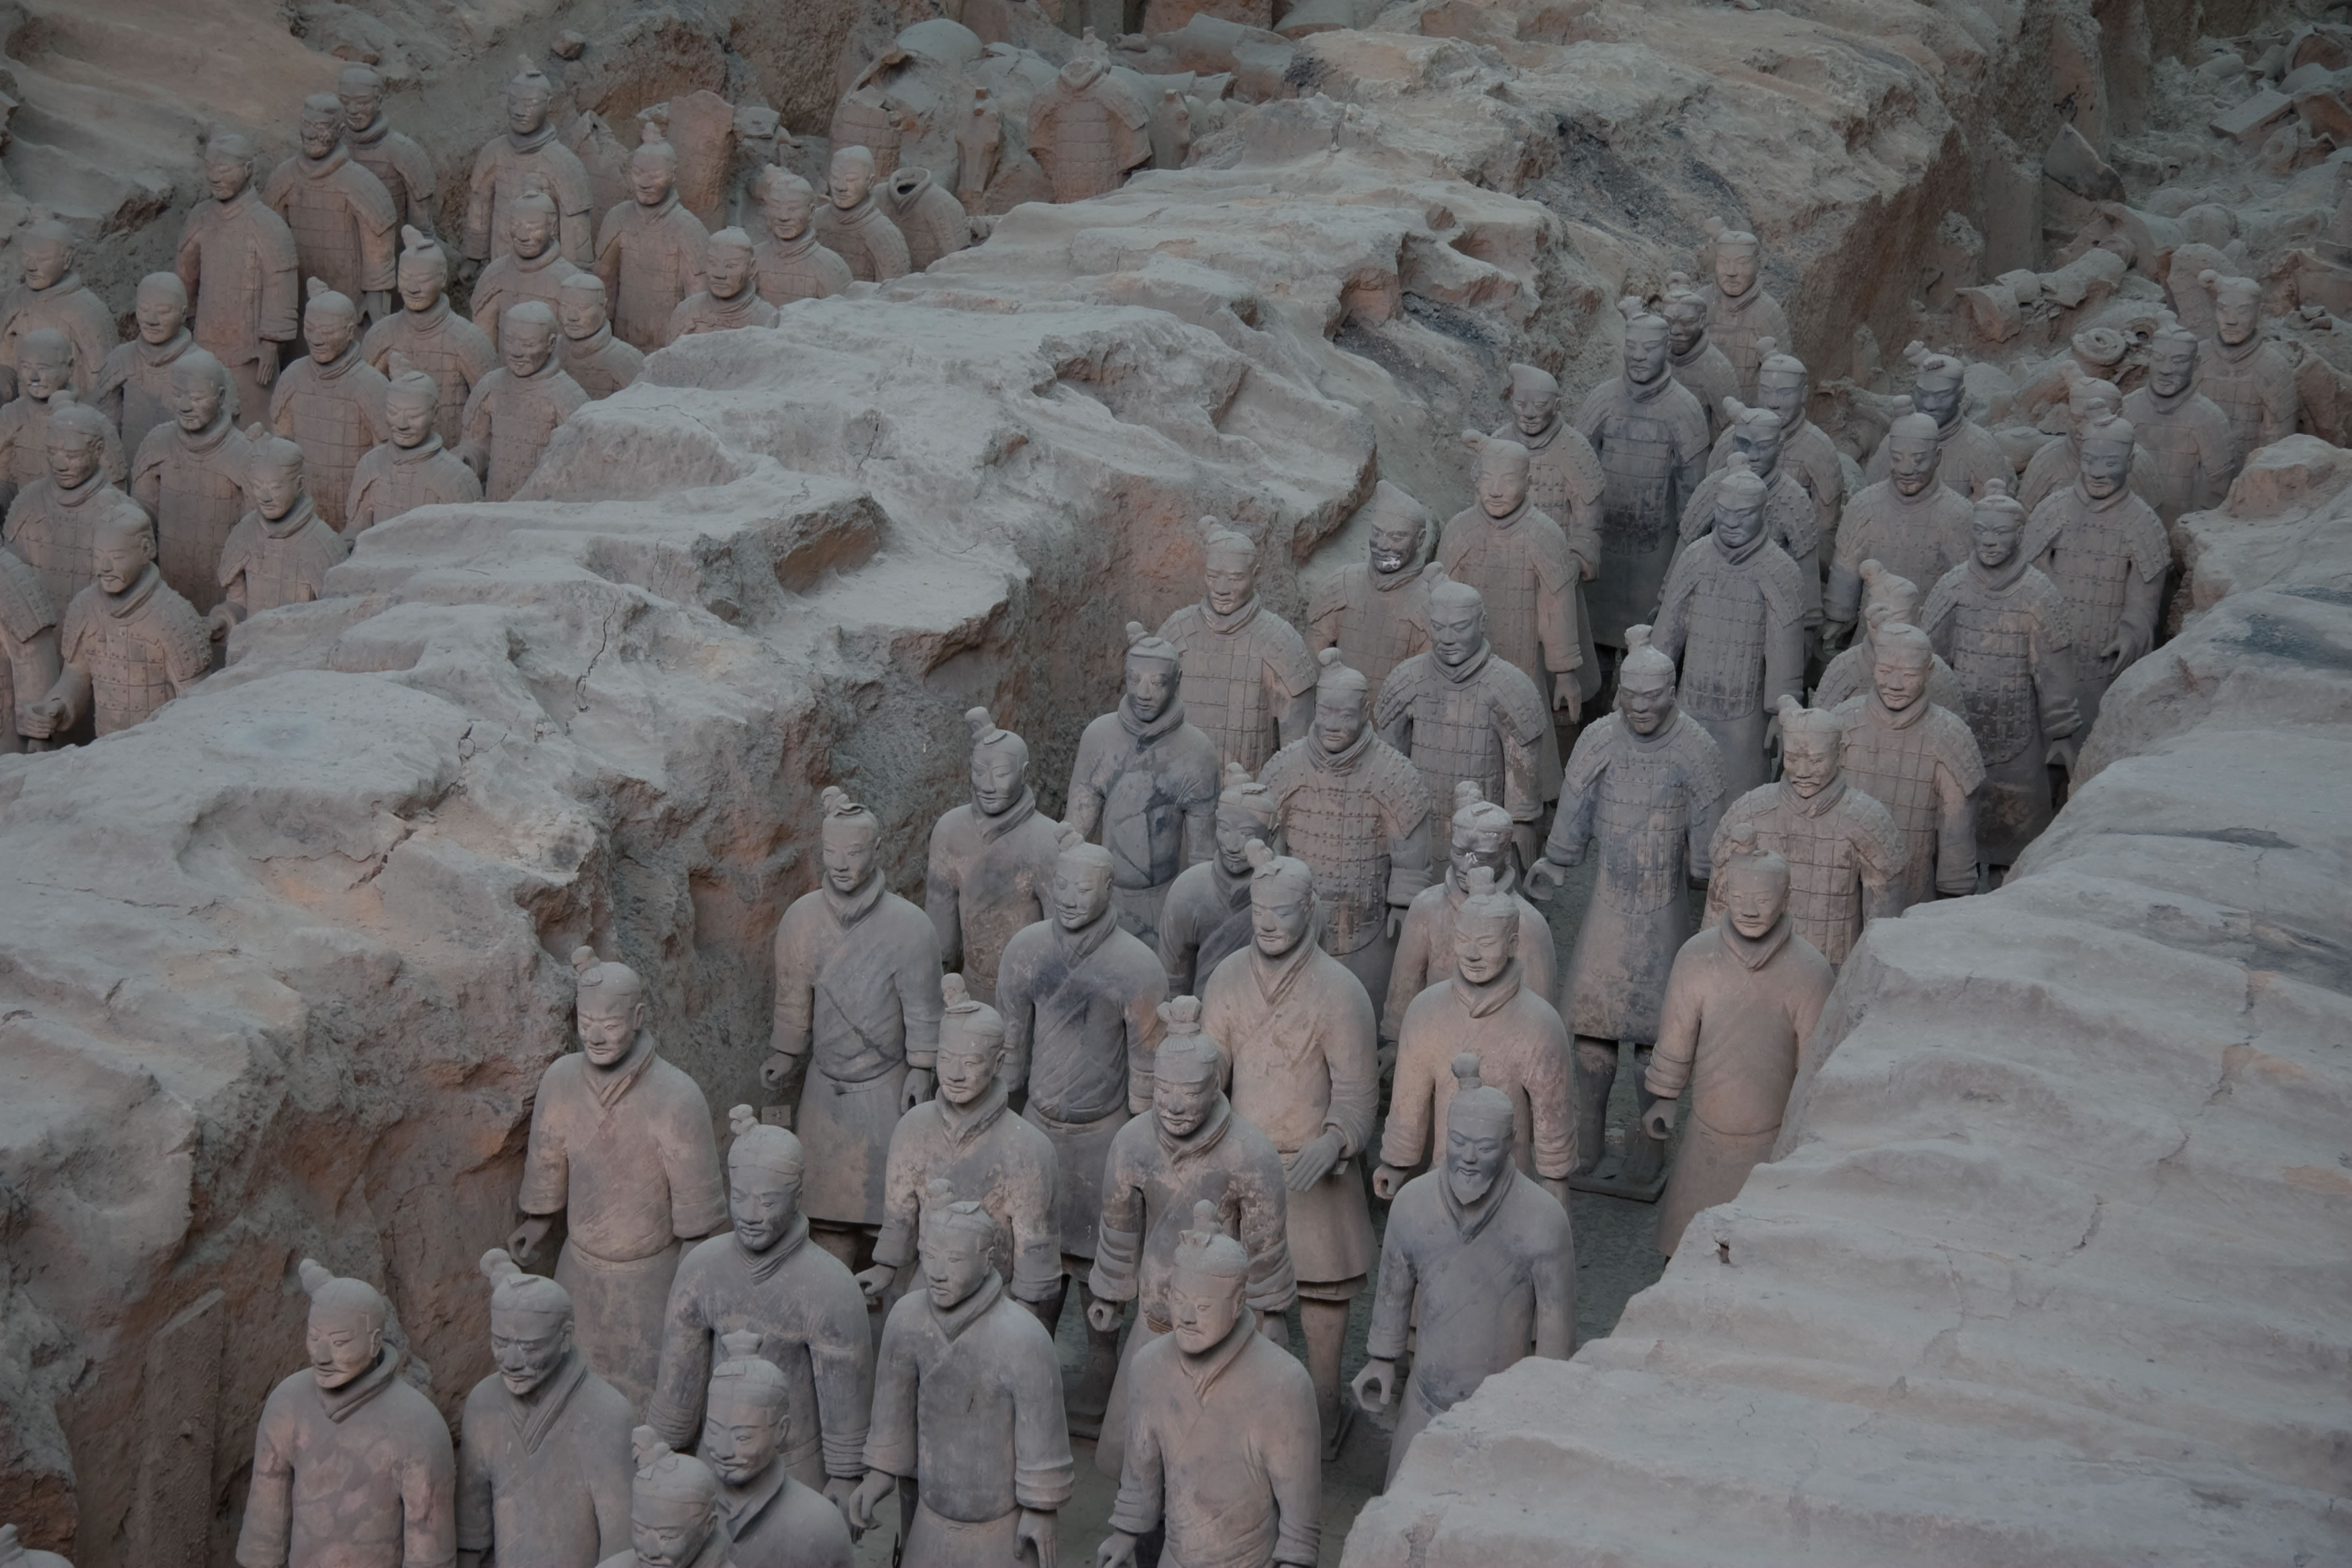 terracotta clay army images